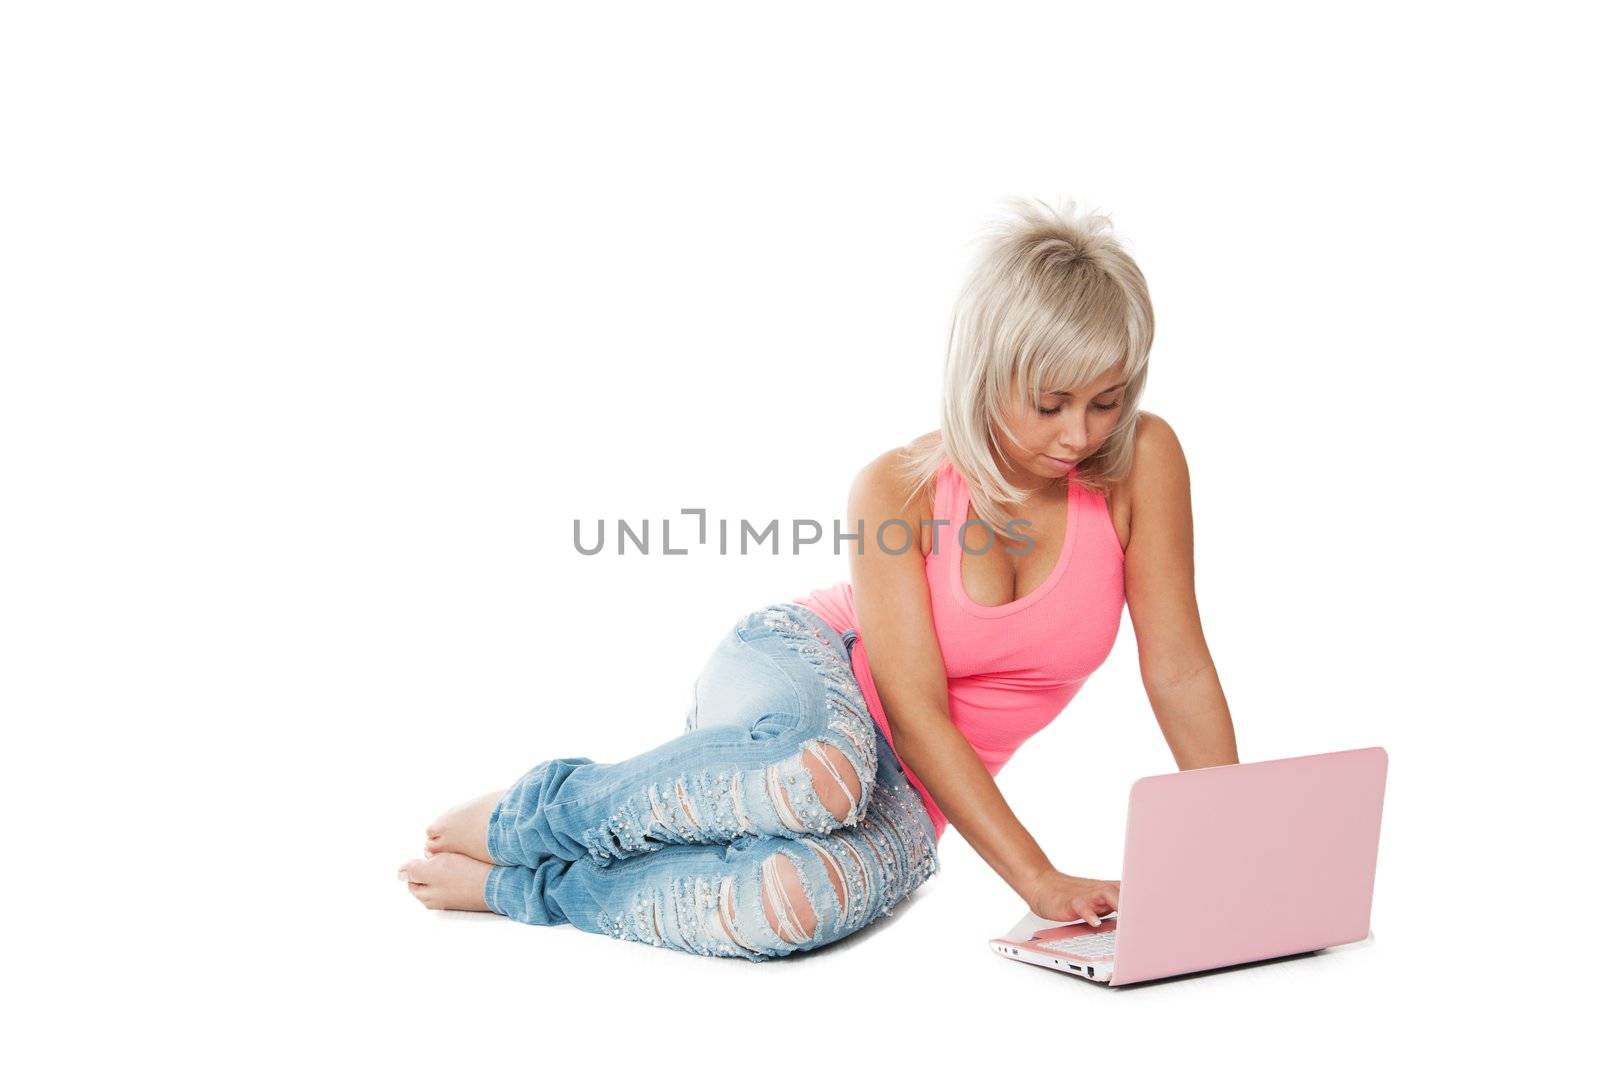 girl in a pink shirt, blue jeans sitting with a laptop